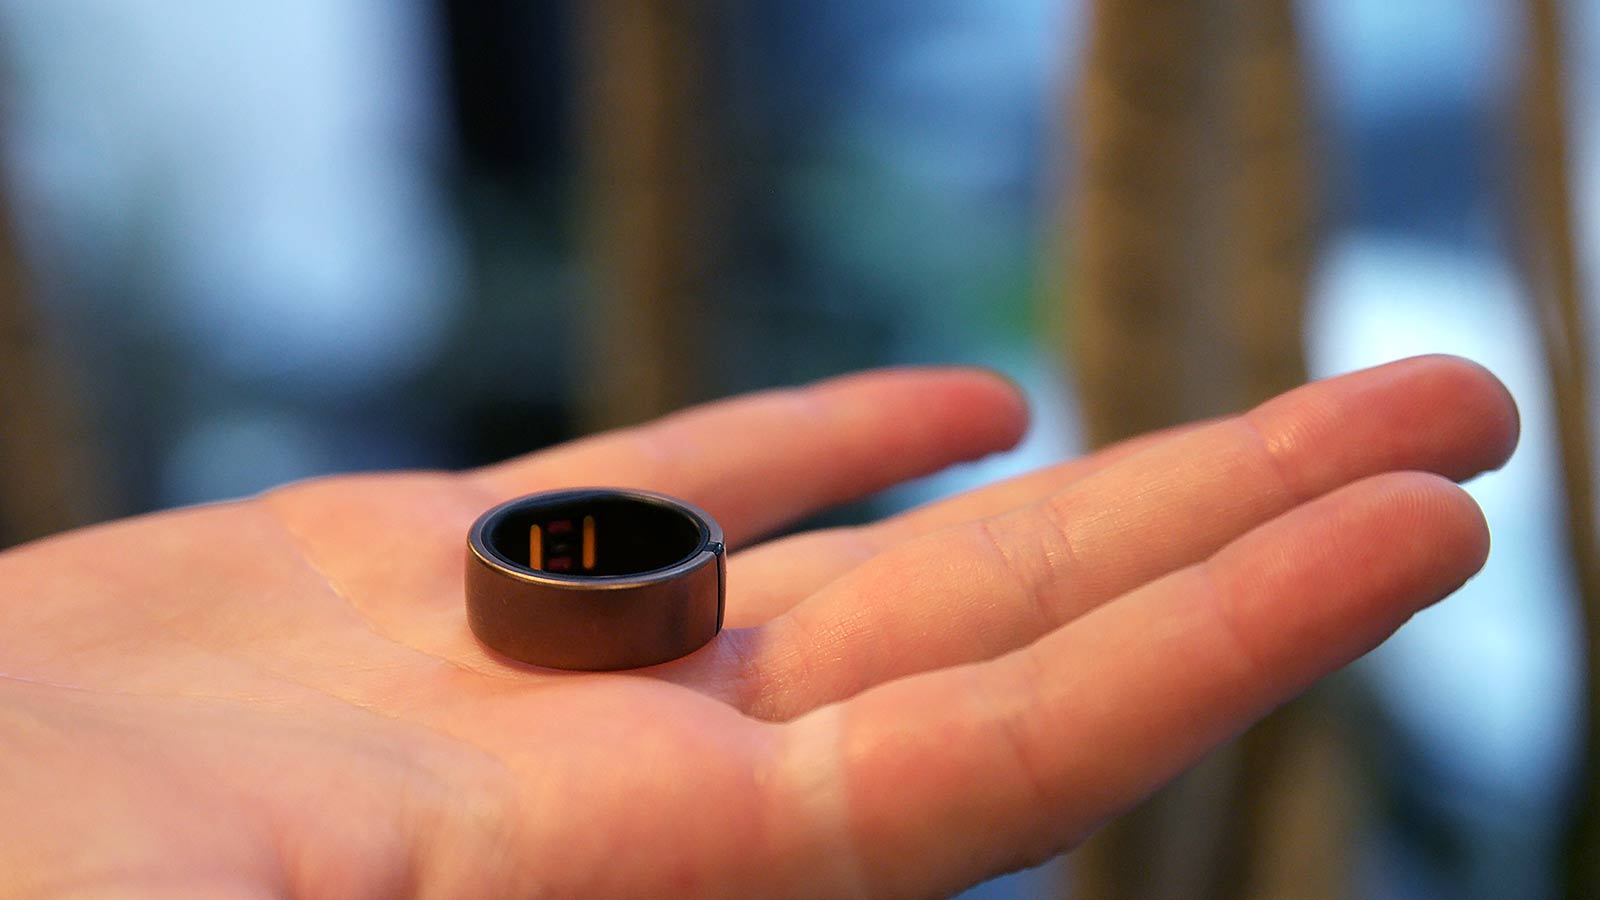 Oh Shit, People Actually Complimented Me On My Smart Ring 